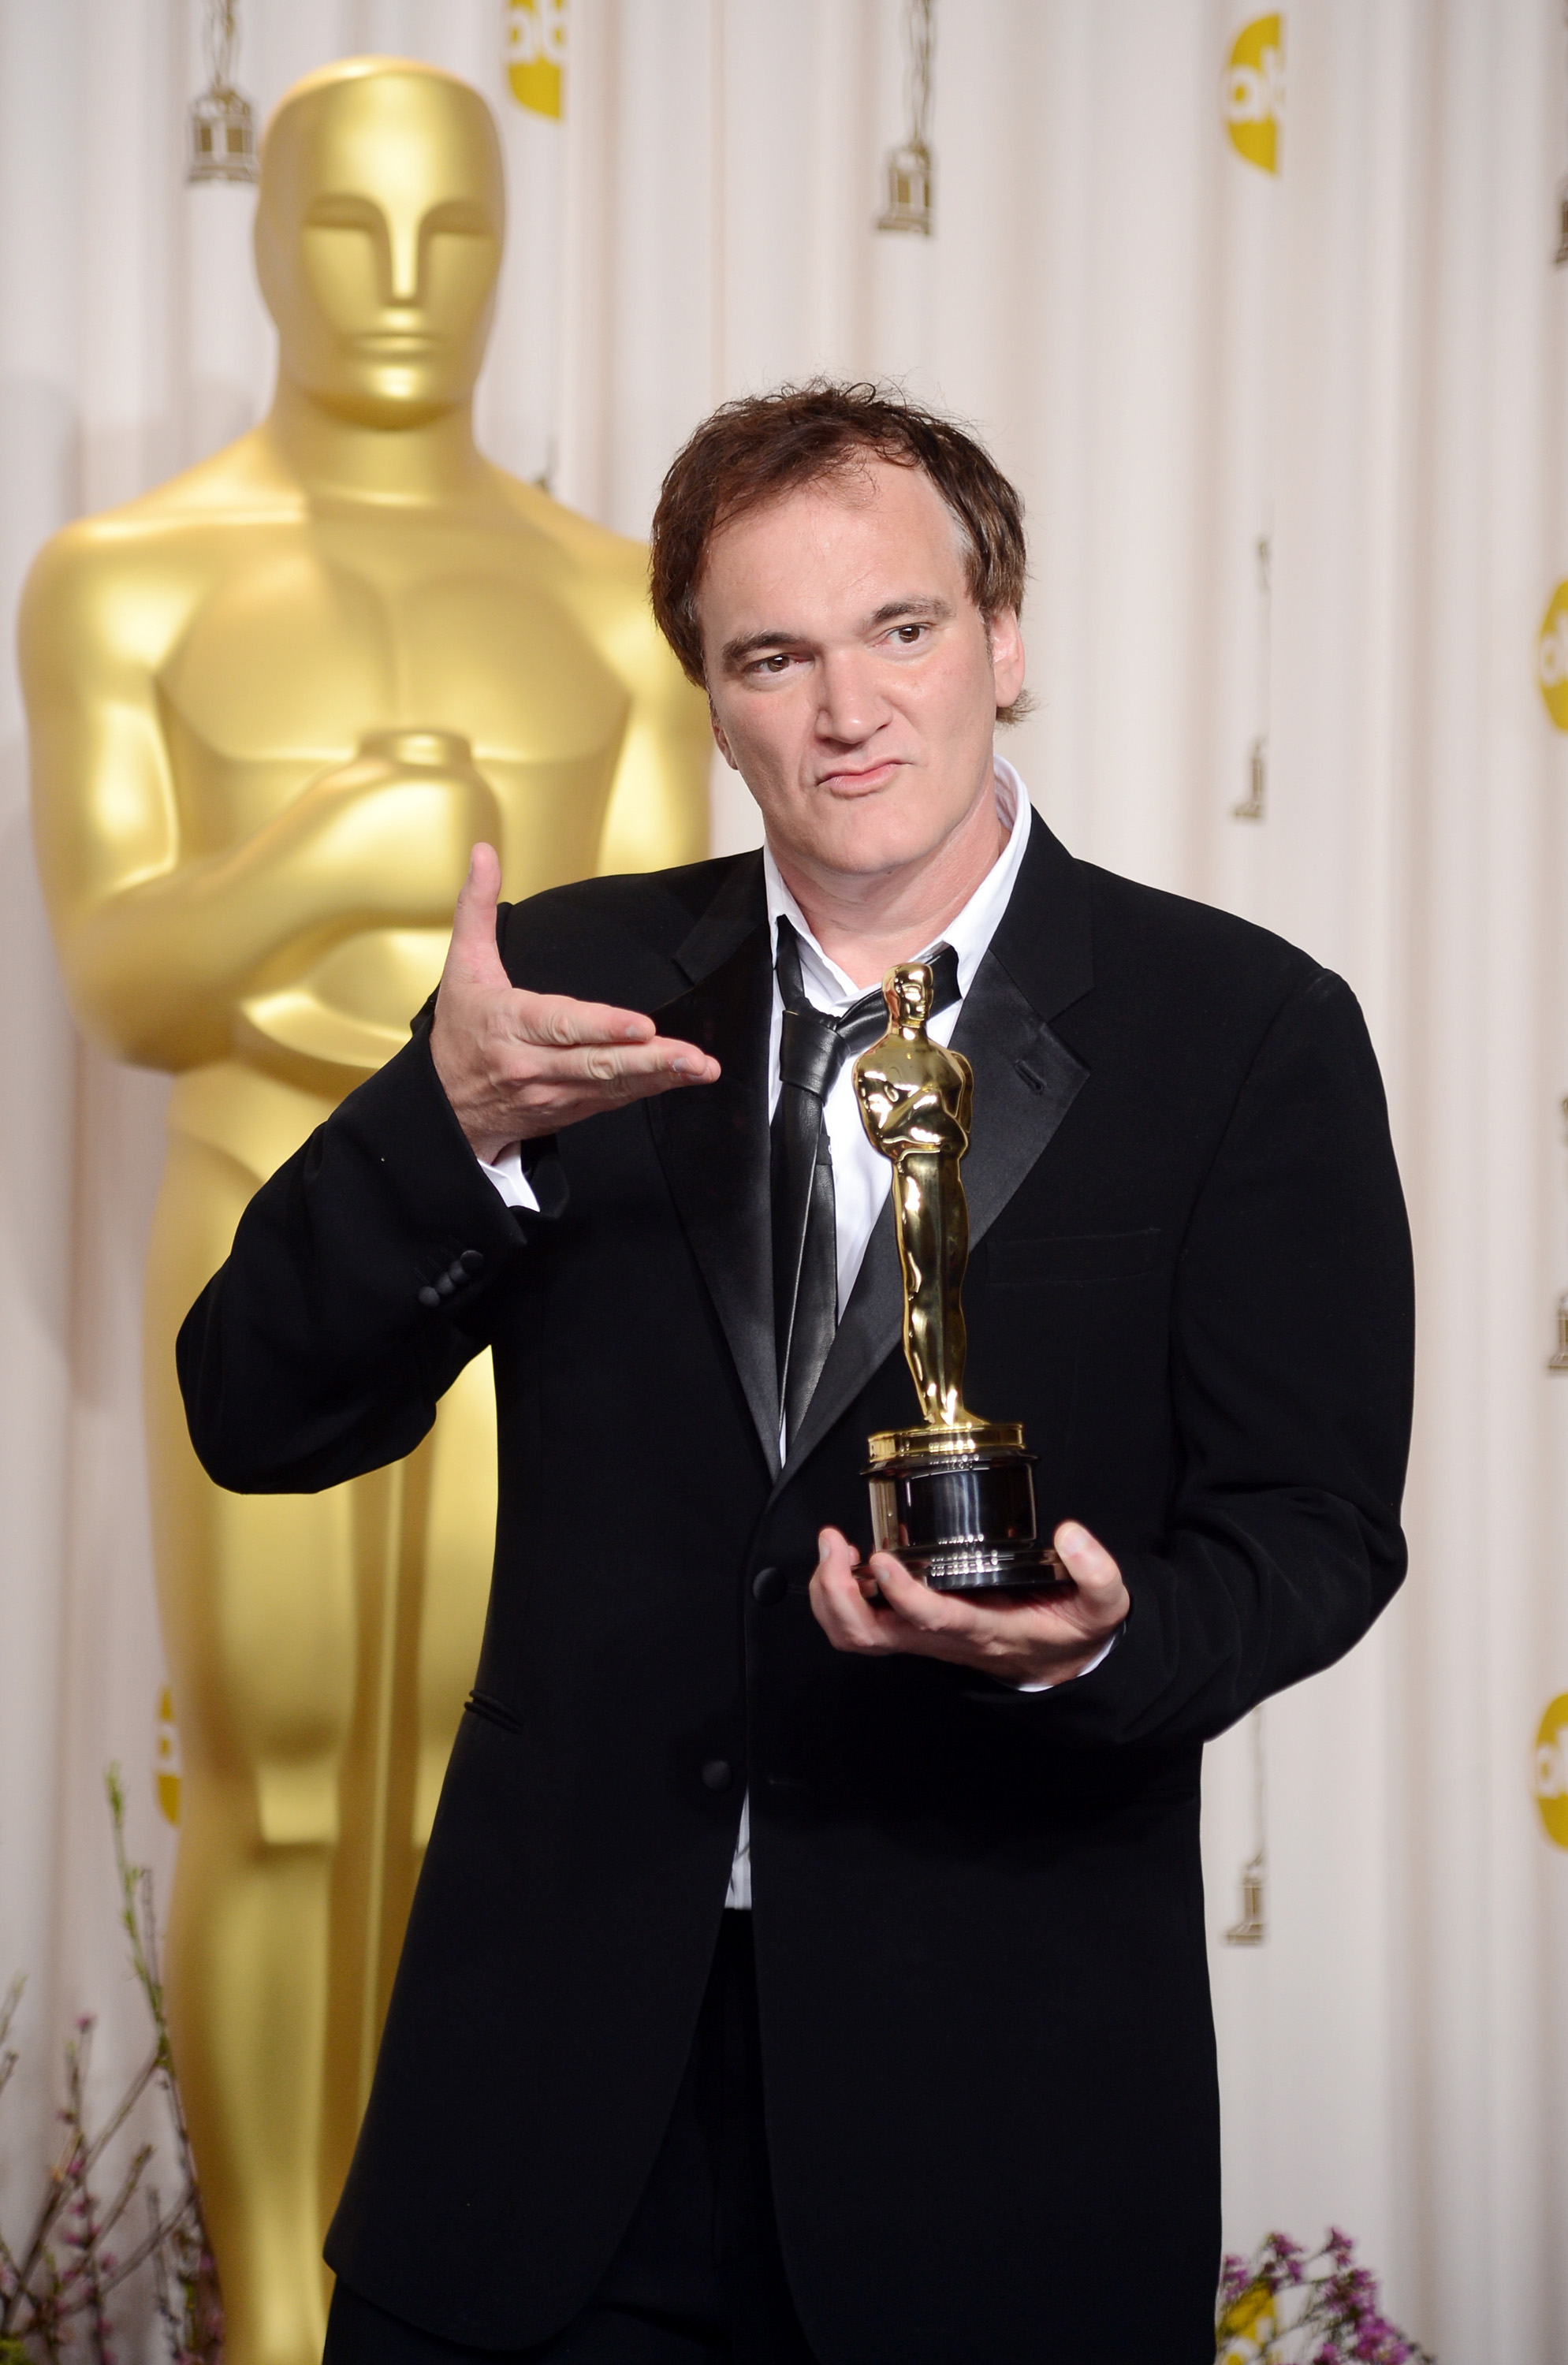 HOLLYWOOD, CA - FEBRUARY 24: Writer-director Quentin Tarantino, winner of the Best Original Screenplay award for "Django Unchained," poses in the press during the Oscars held at Loews Hollywood Hotel on February 24, 2013 in Hollywood, California. (Photo by Jason Merritt/Getty Images)